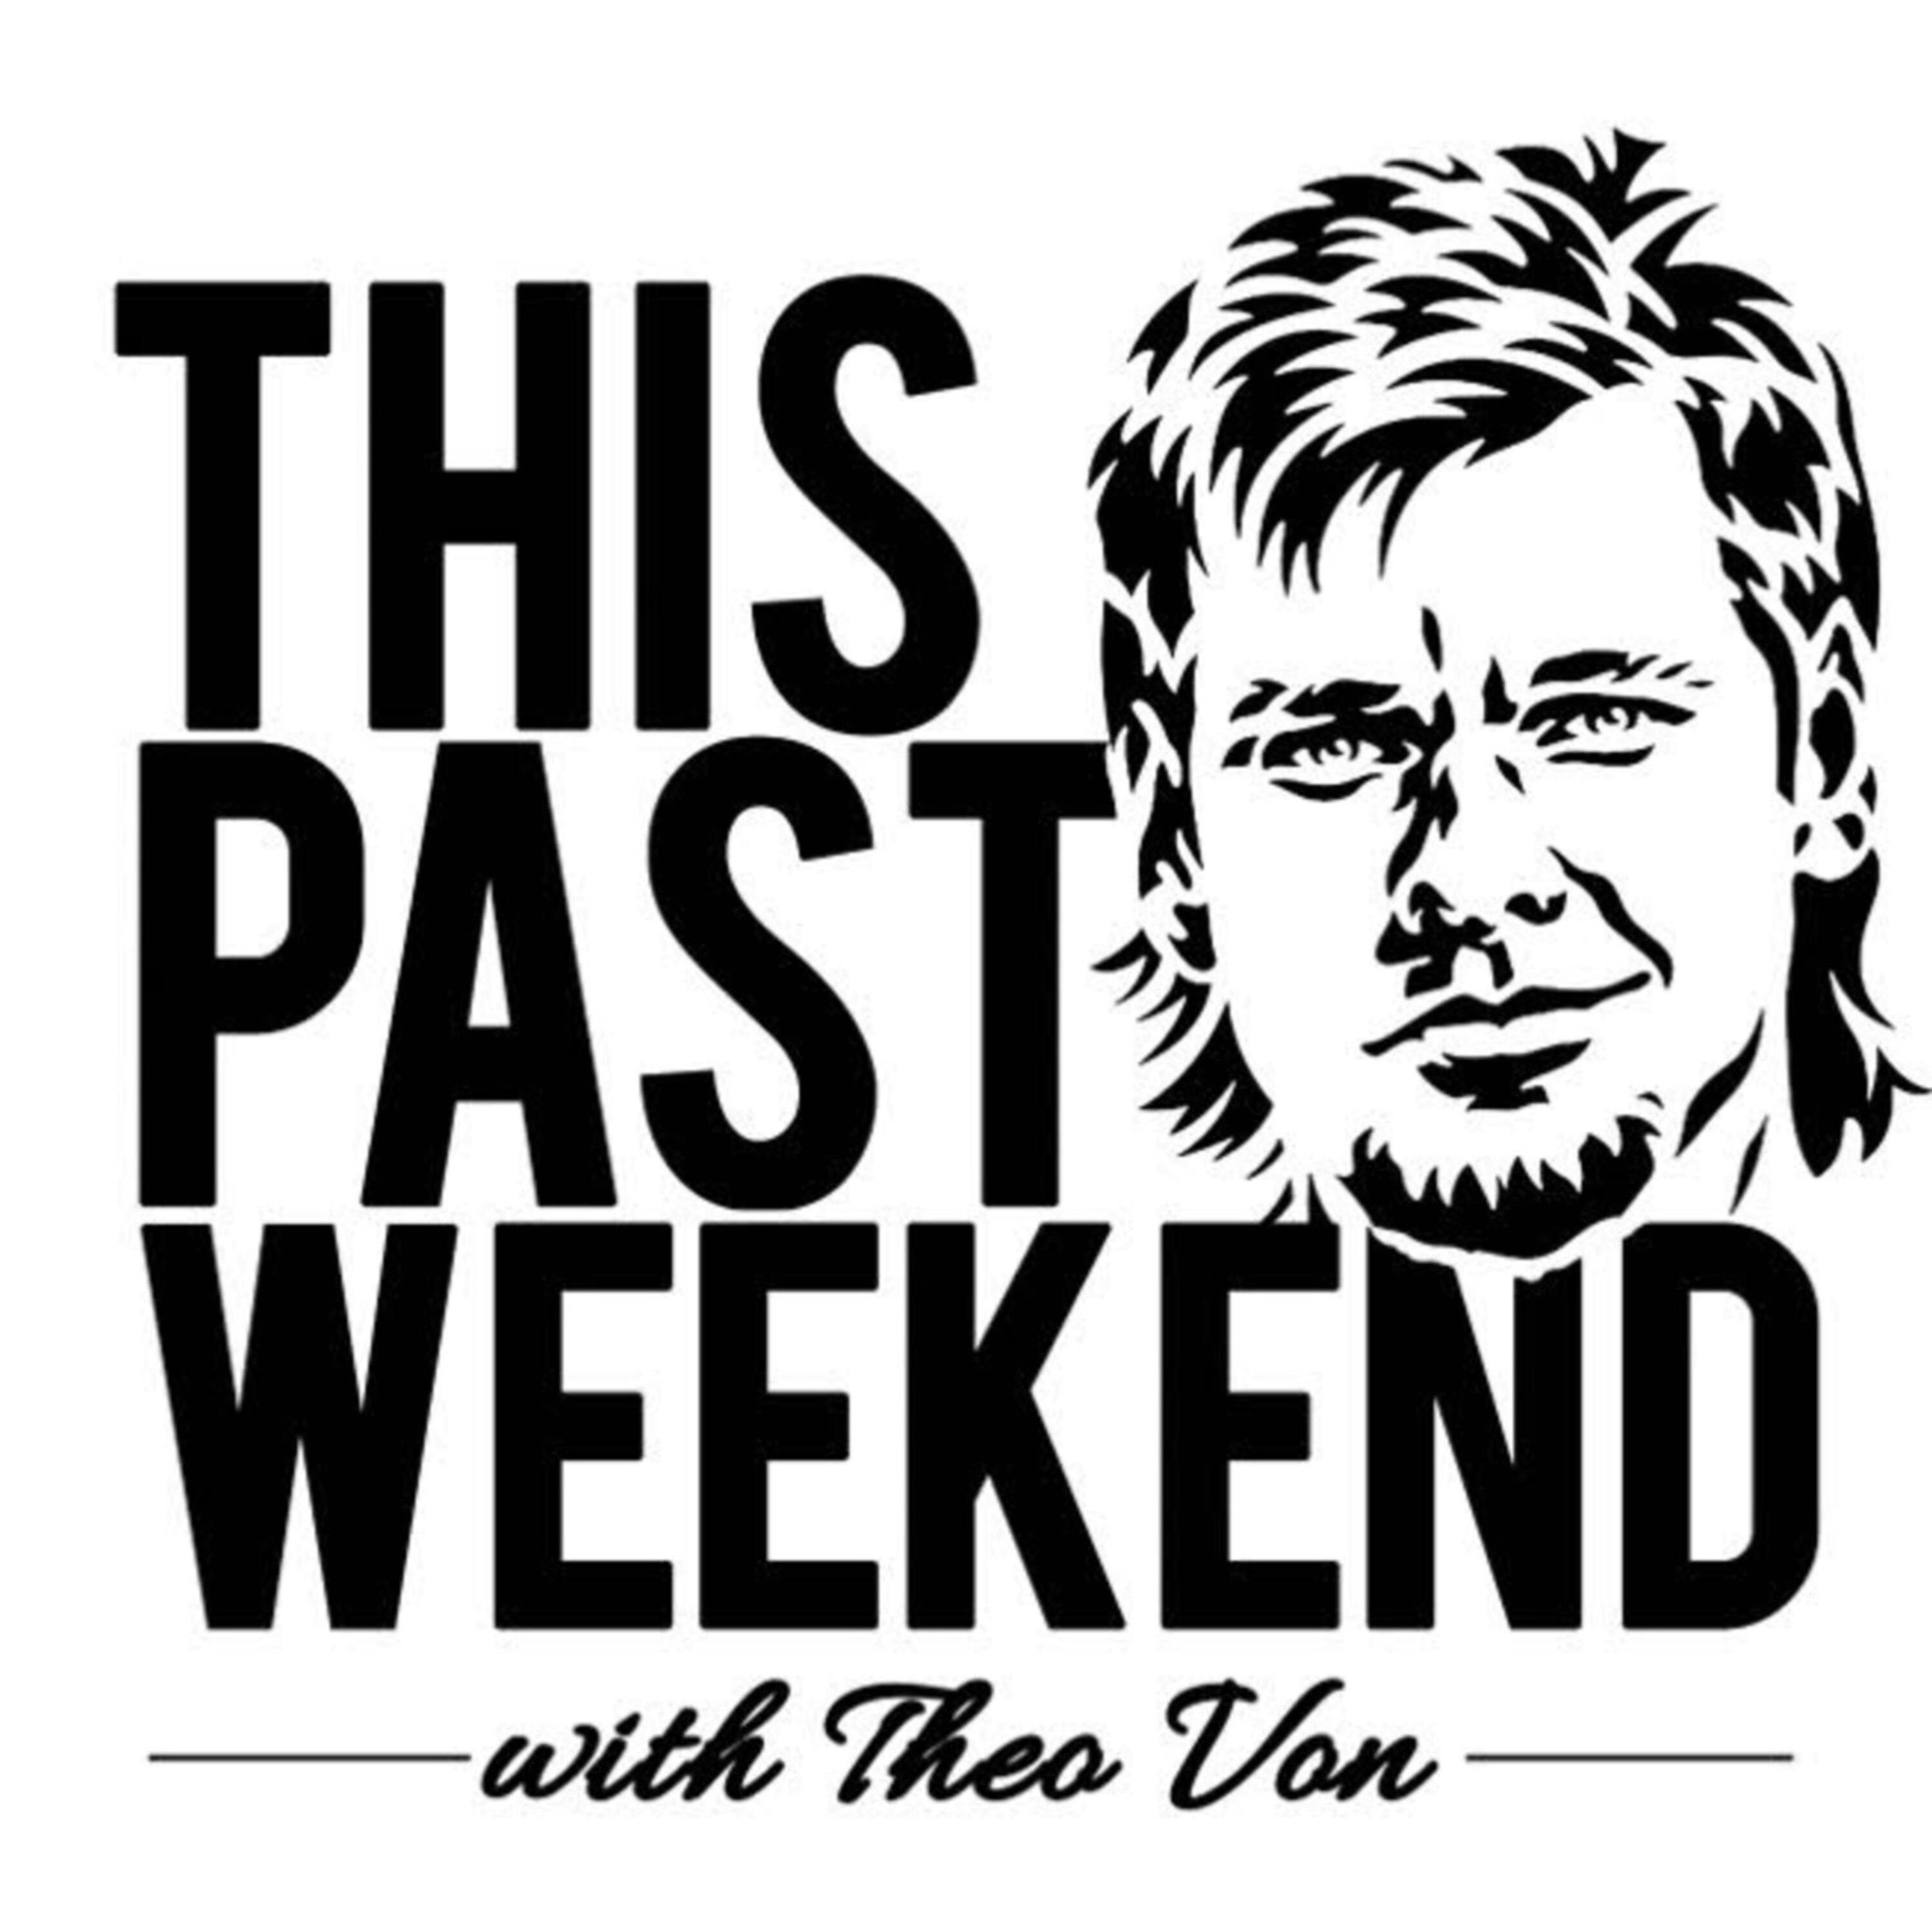 Chris Lilley | This Past Weekend #200 by Theo Von